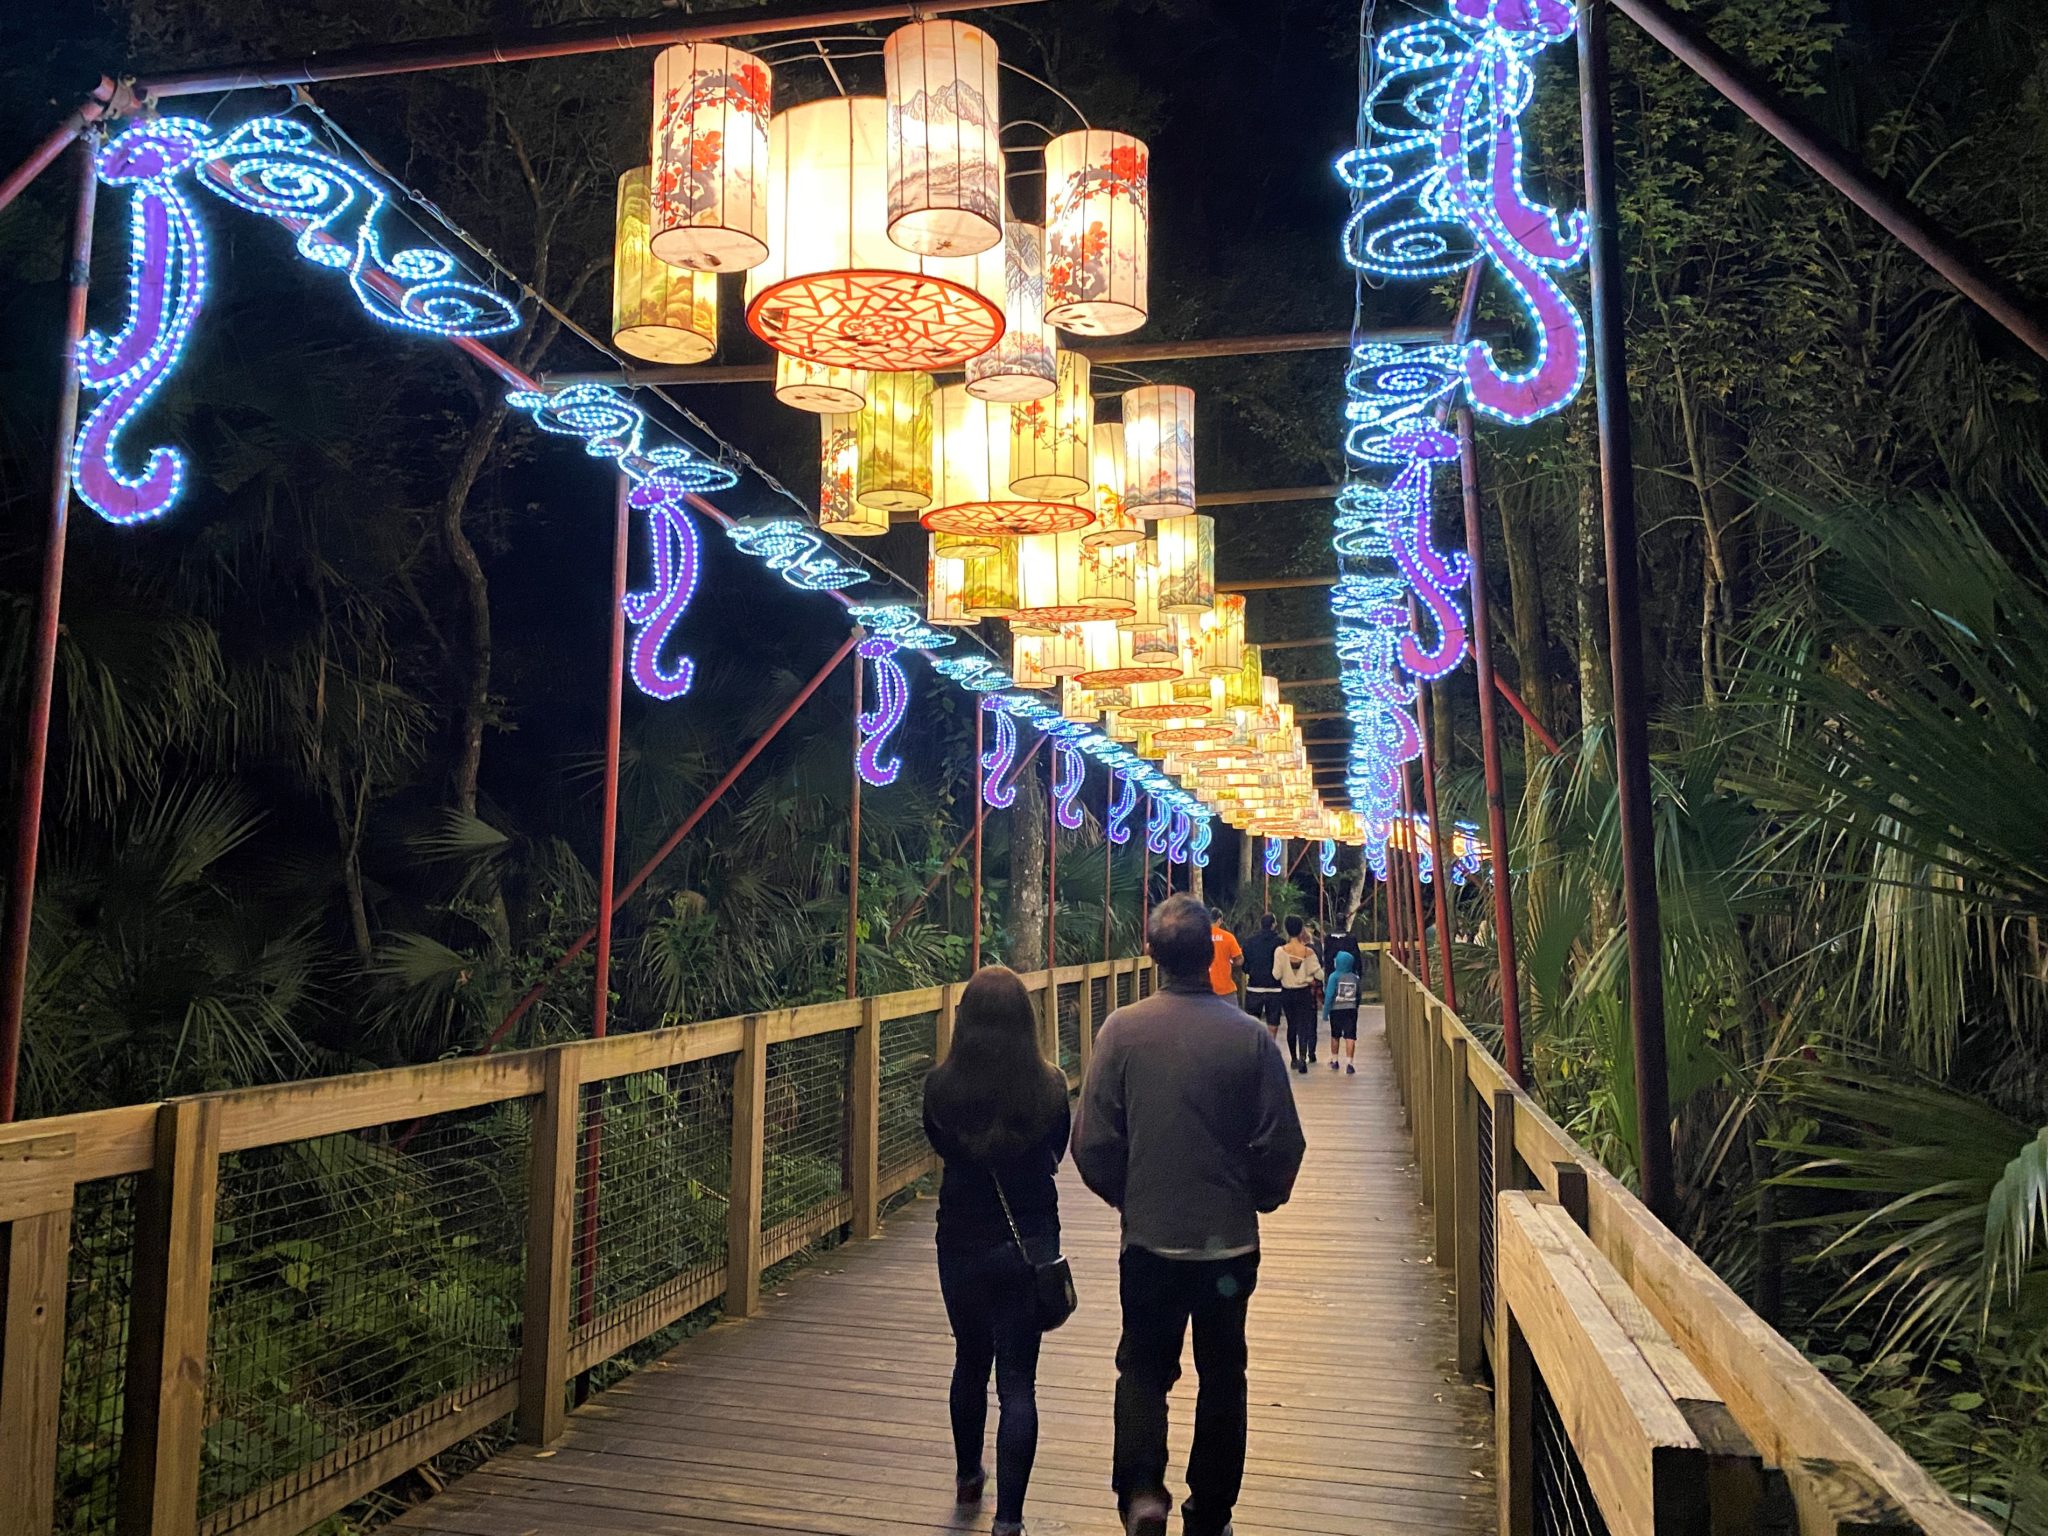 A Luminous Date at the Central Florida Zoo Asian Lantern Festival